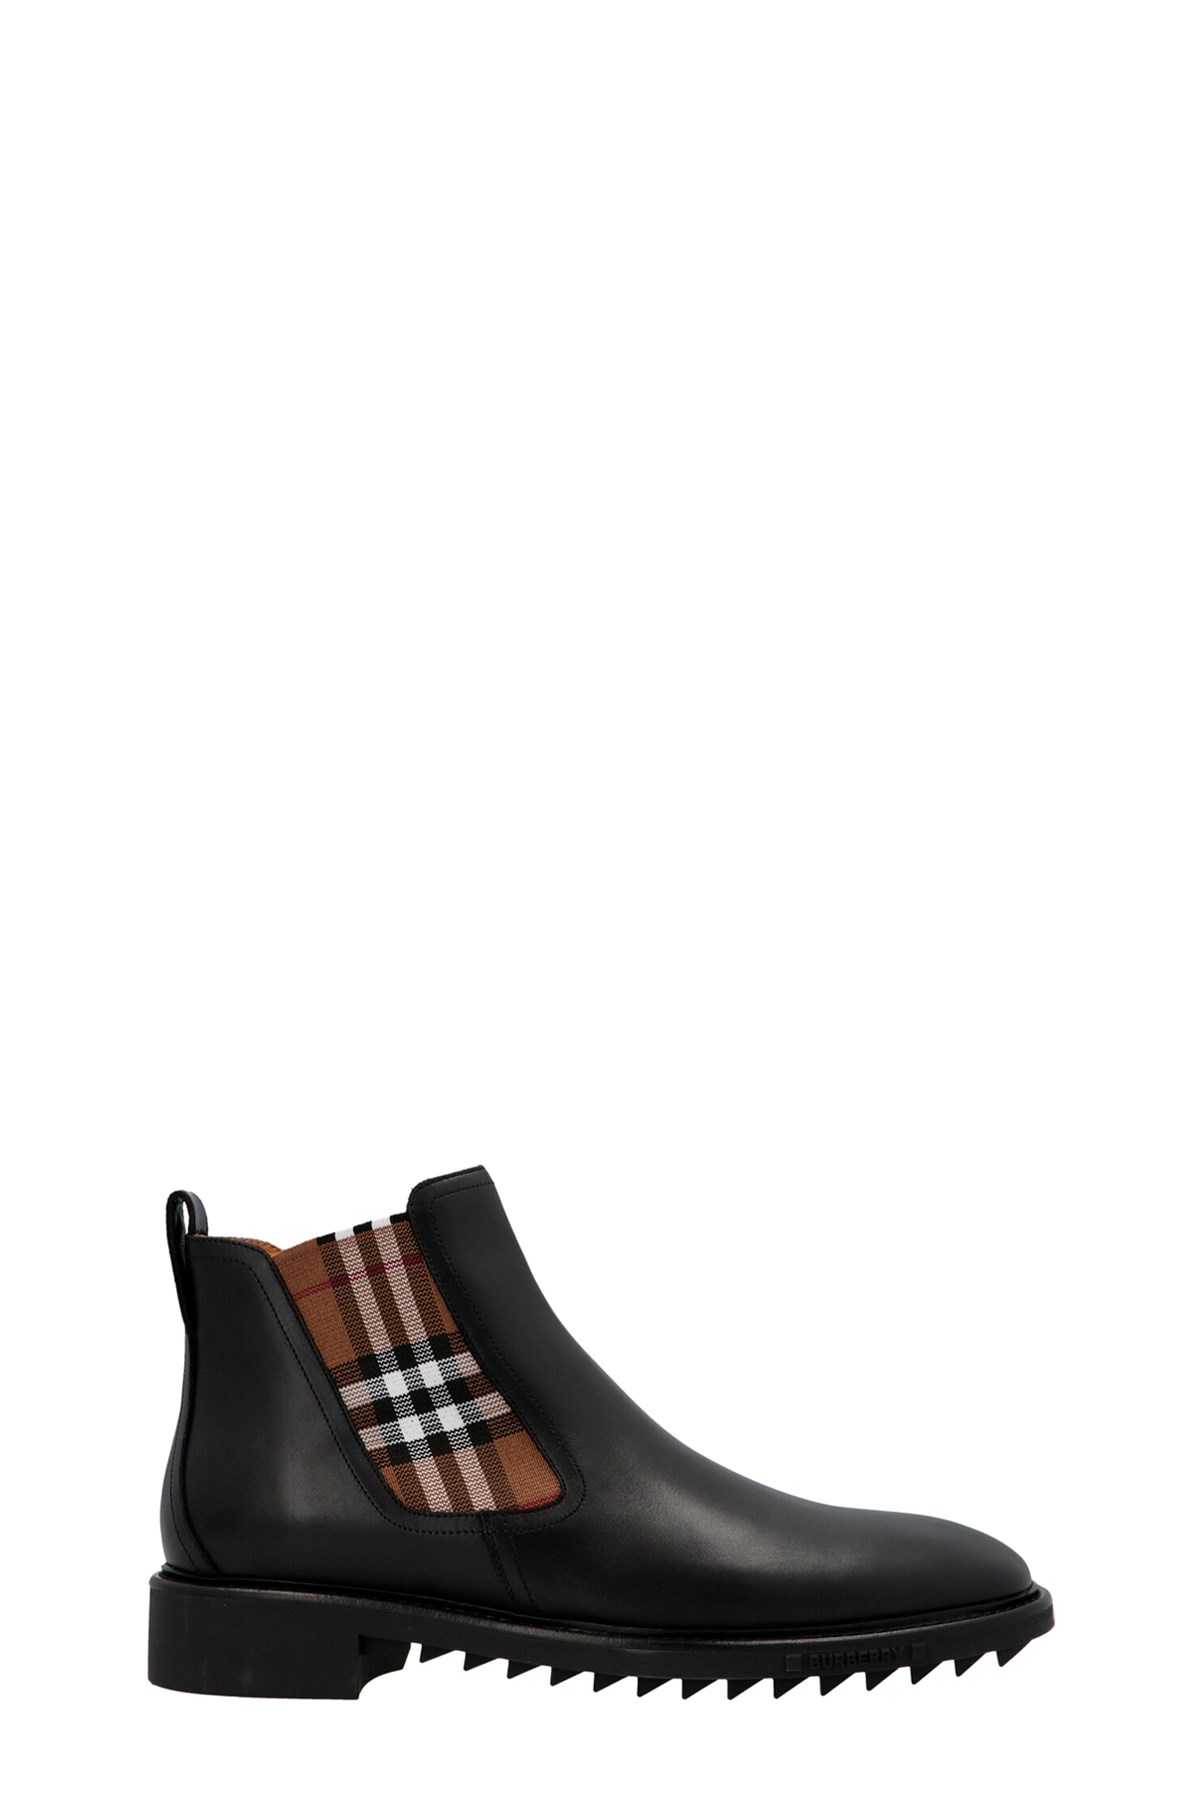 BURBERRY 'Allostock’ Ankle Boots